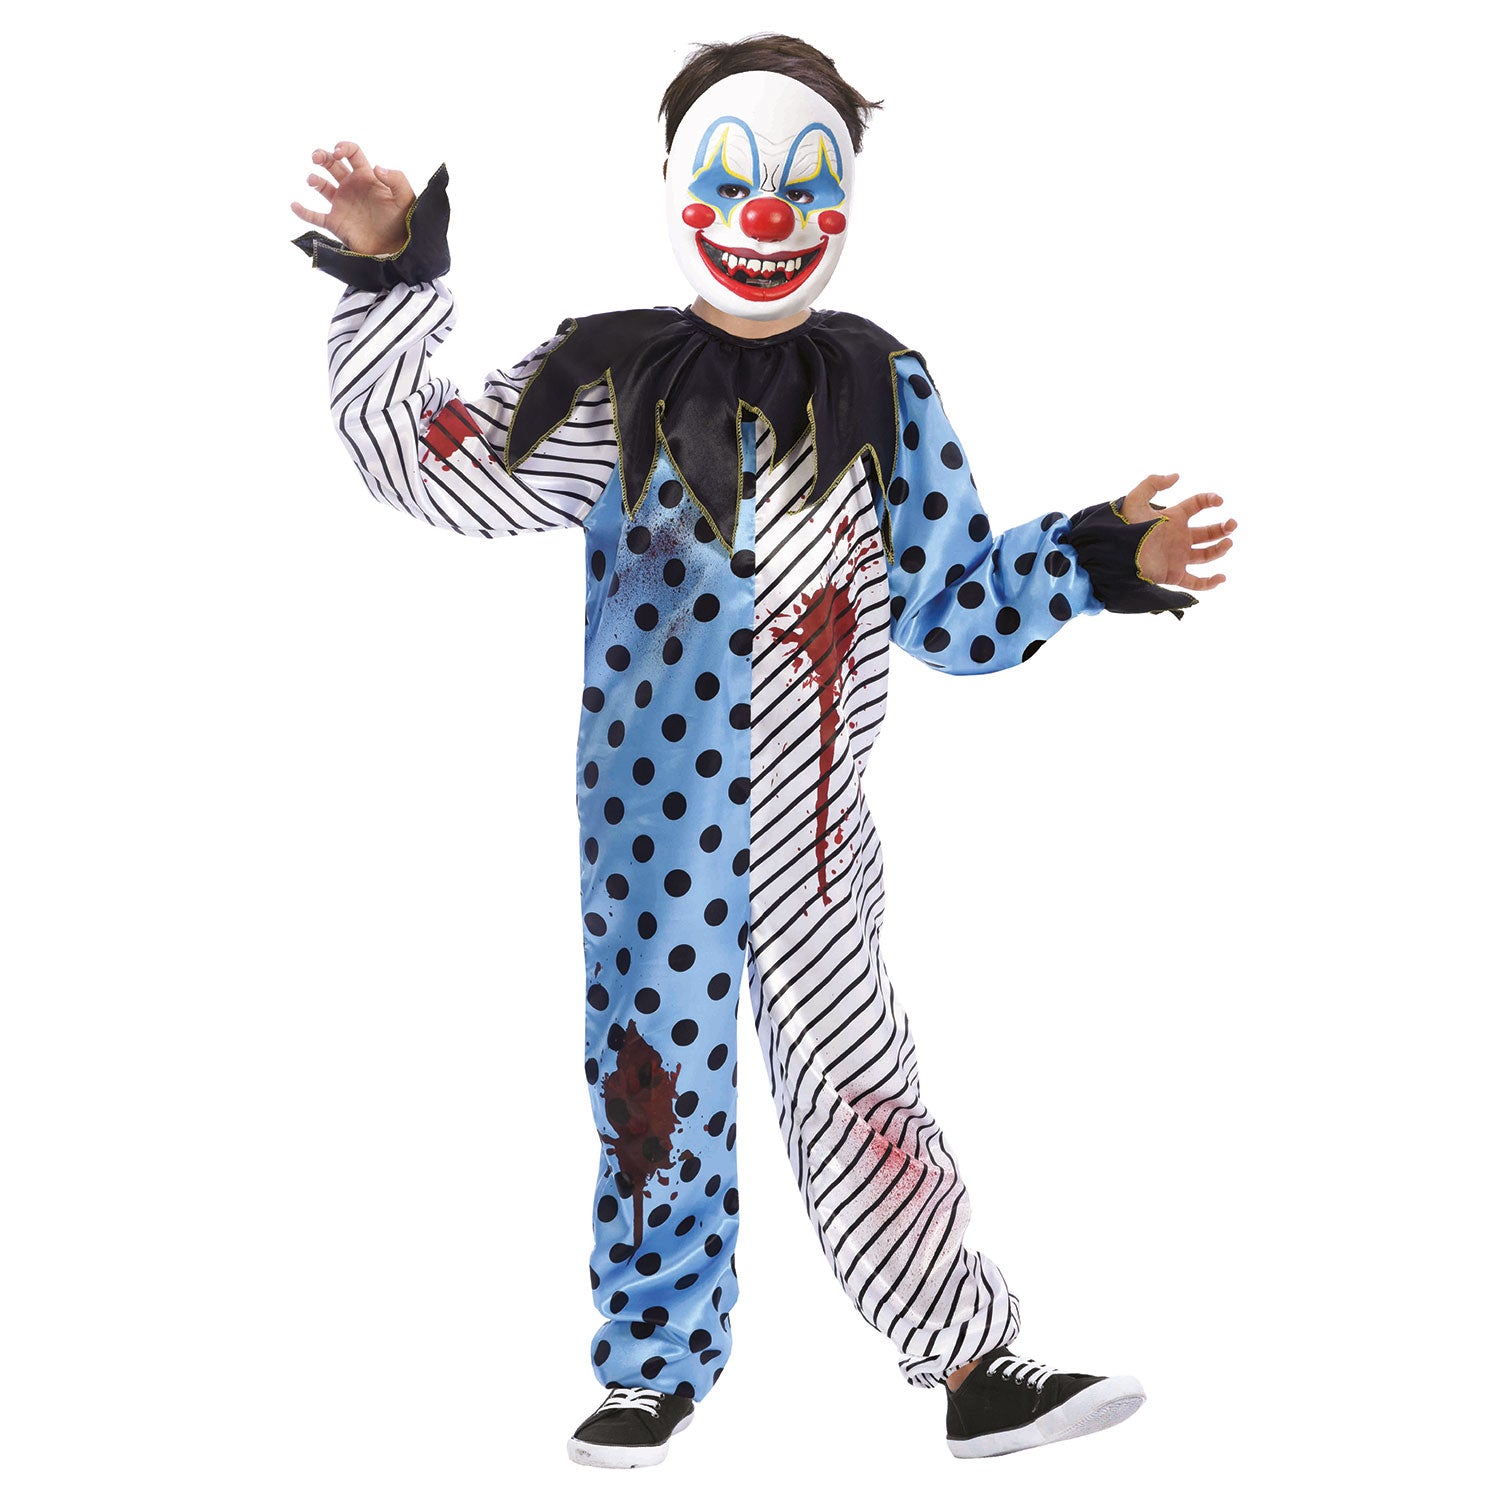 Crazed Clown with Mask